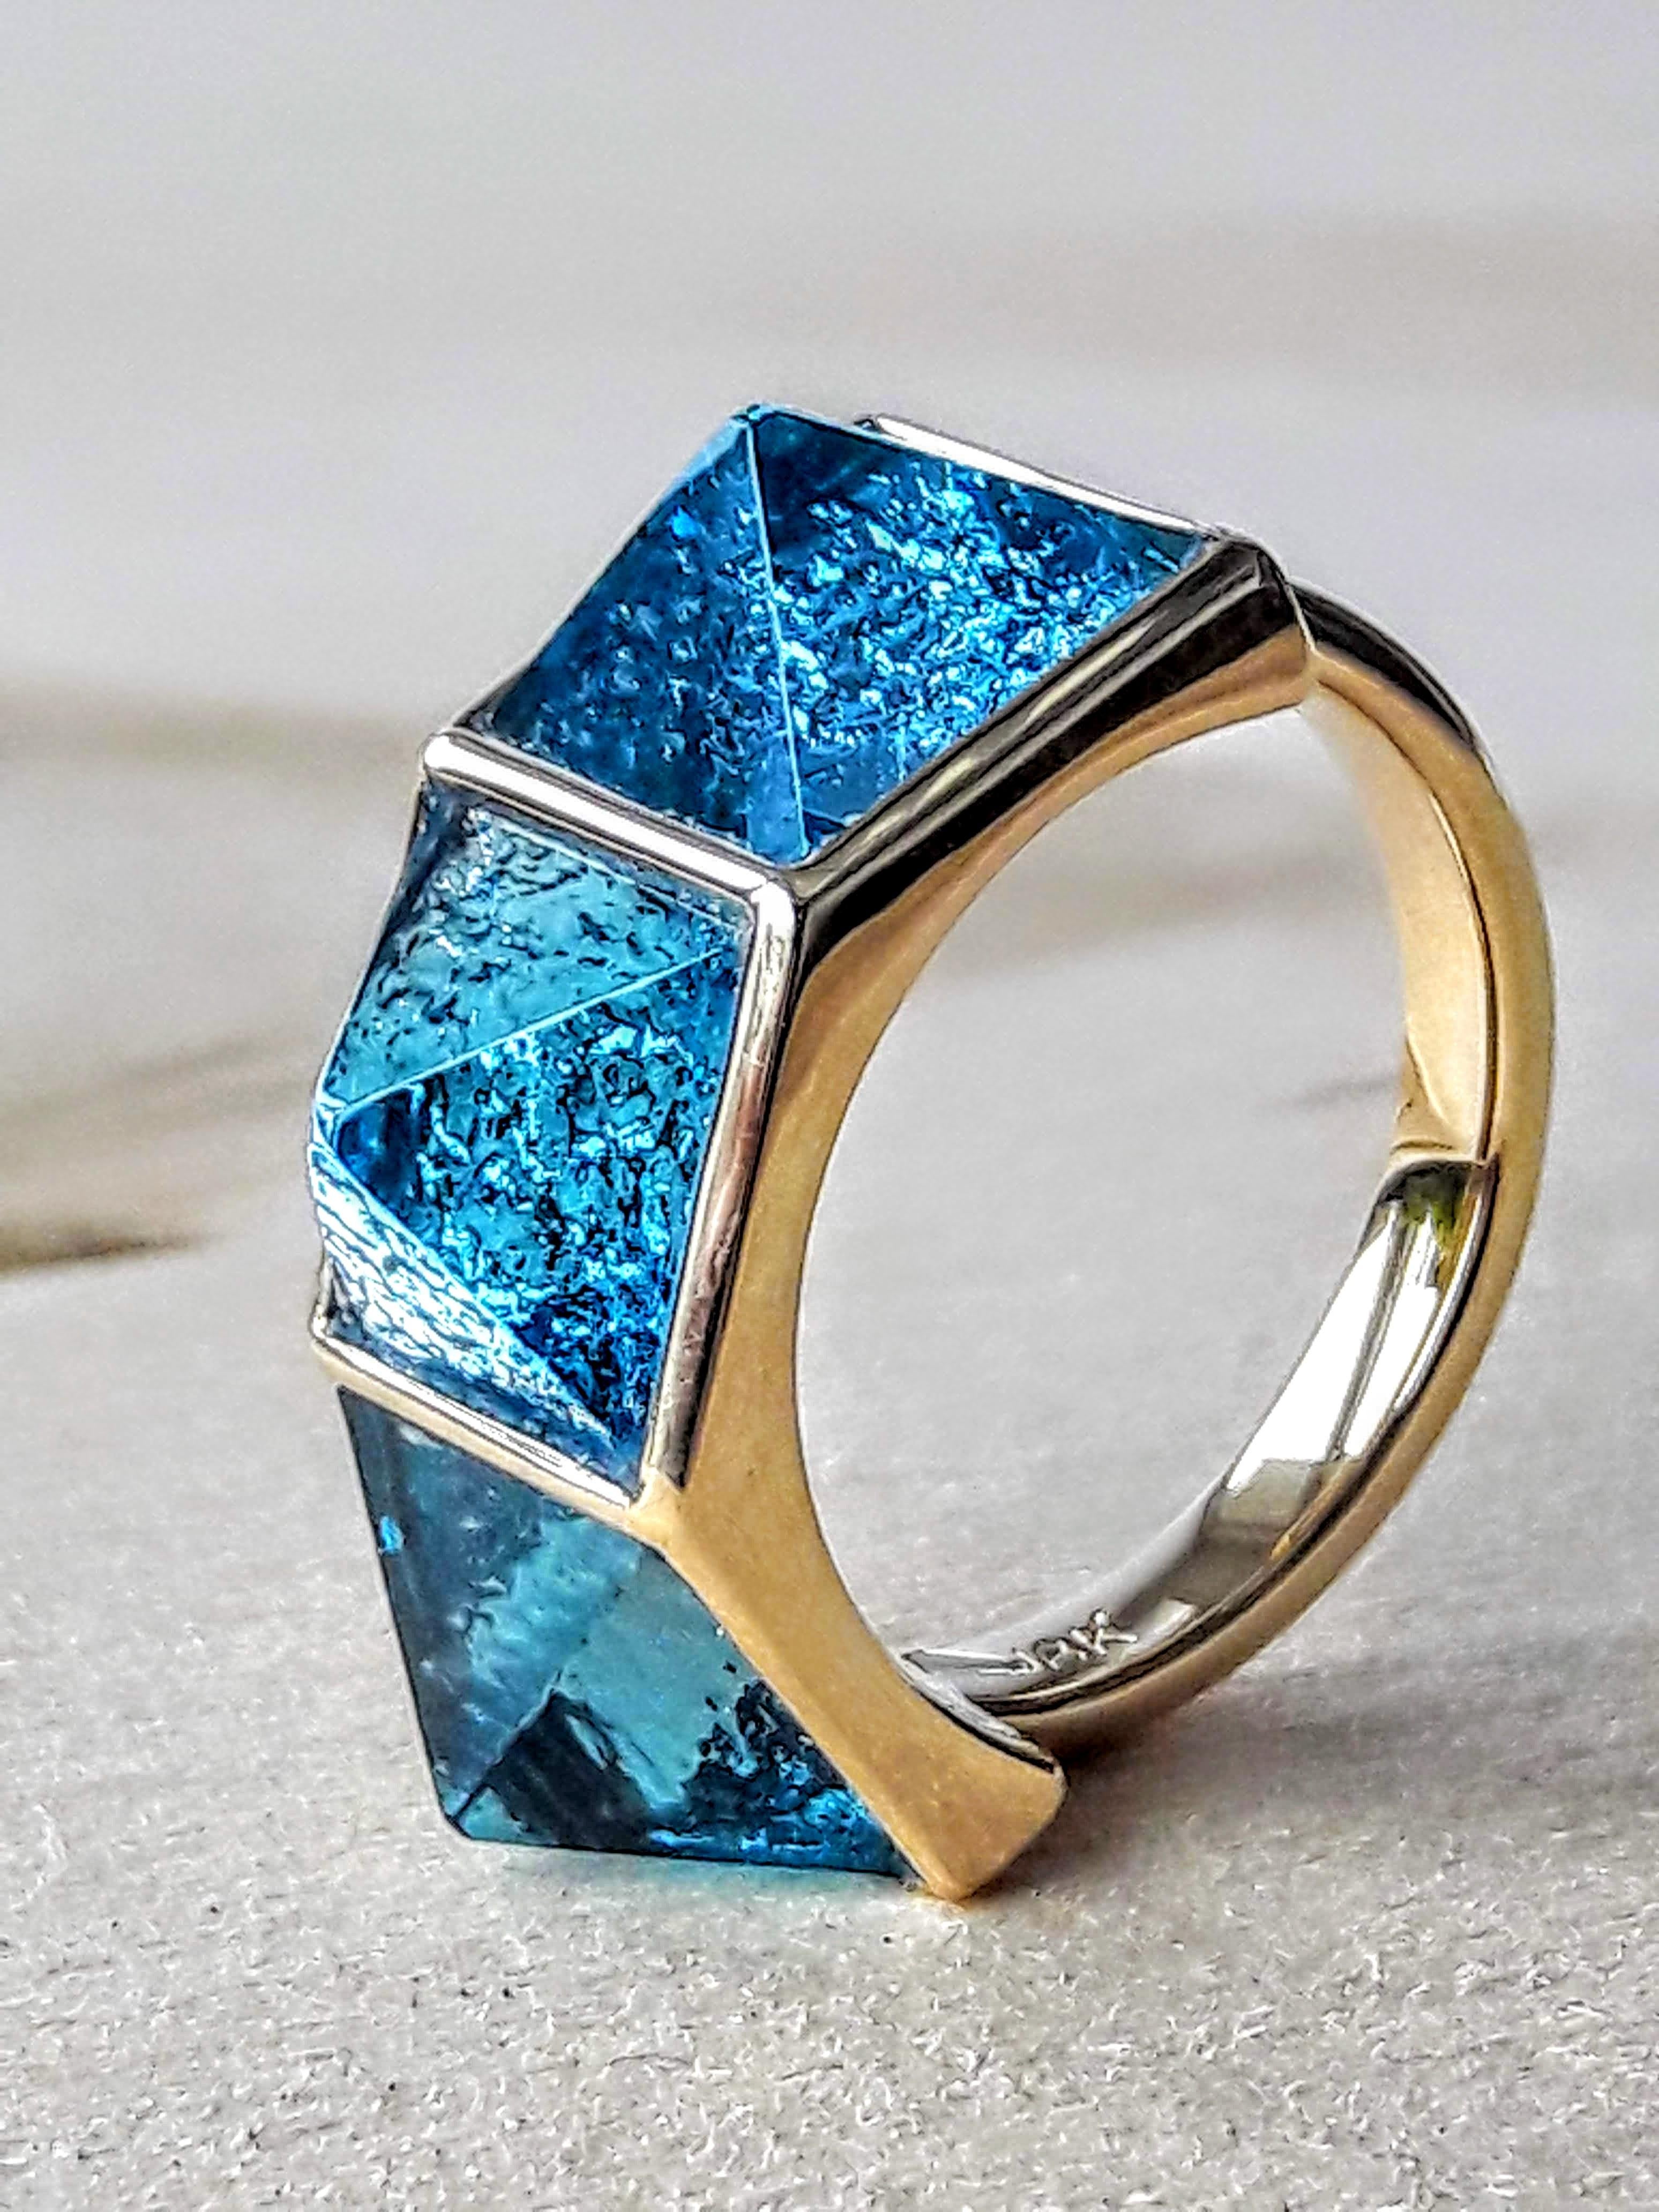 Pyramid collection, the Three Pyramids, swiss blue Topazes ring in 18k yellow gold, manufactured in New York.
This original collection of Pyramid cut, swiss blue topazes gems, set on top of hand work white gold surfaces representing the bottom of a